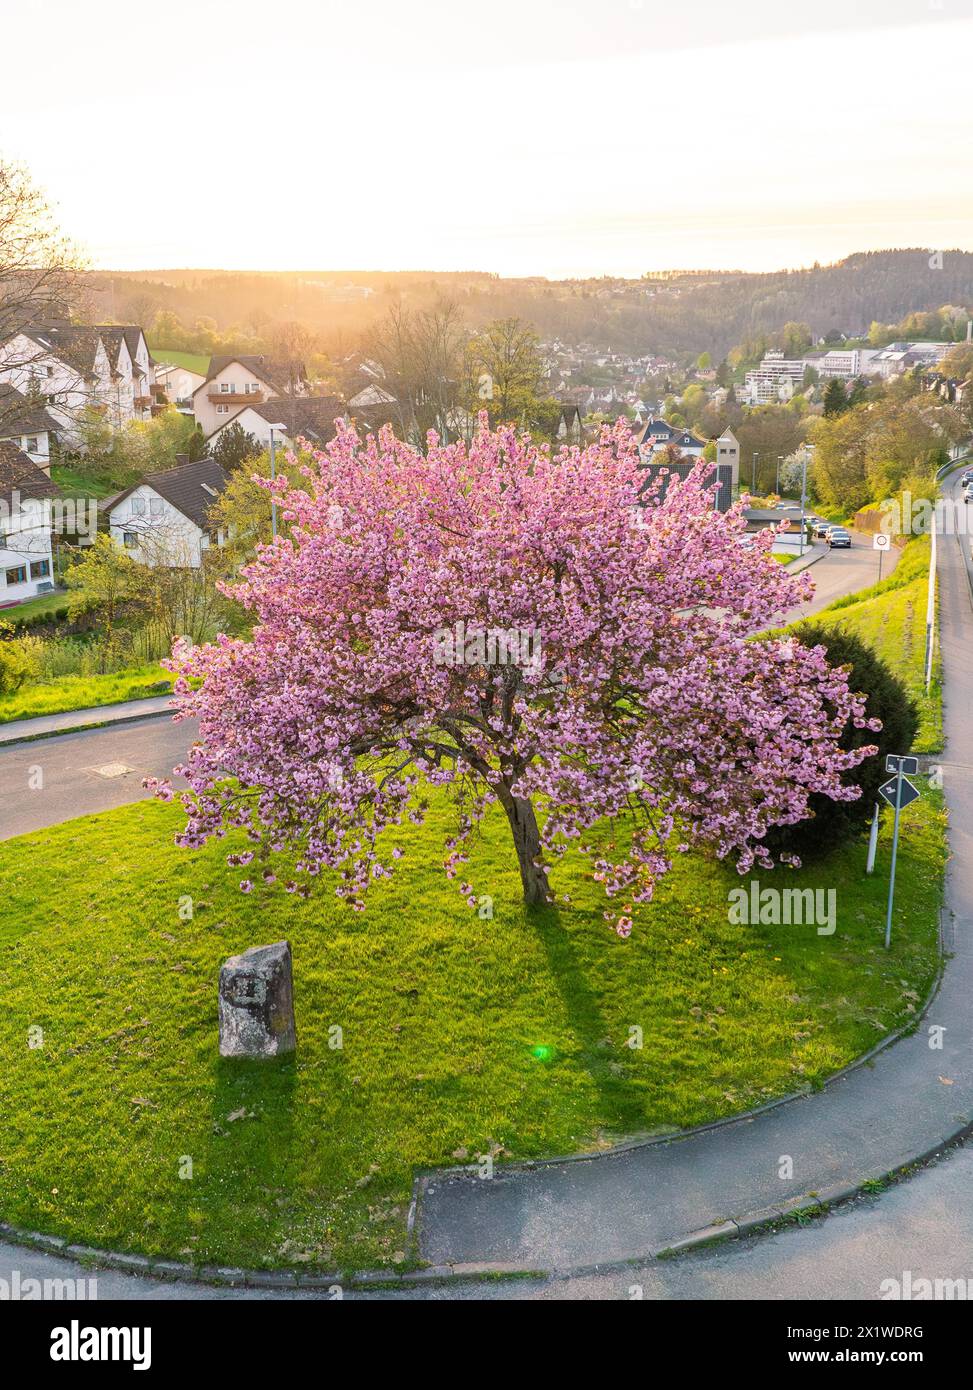 A peaceful scene with a blossoming tree on a street corner during dusk in a suburb, spring, Calw, Black Forest, Germany Stock Photo